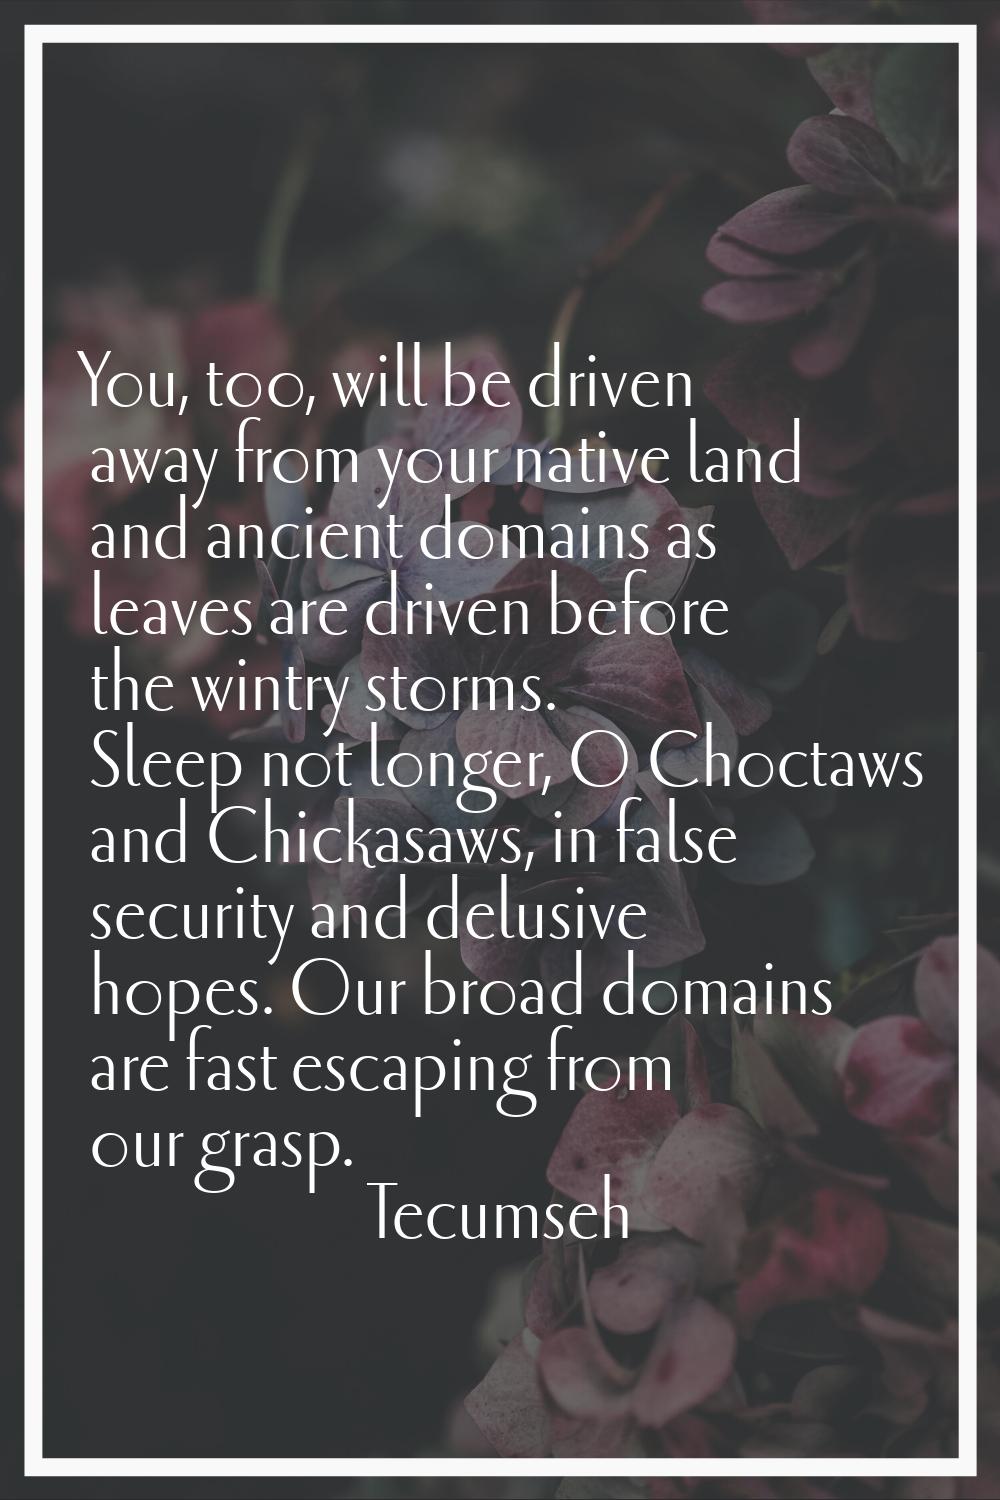 You, too, will be driven away from your native land and ancient domains as leaves are driven before